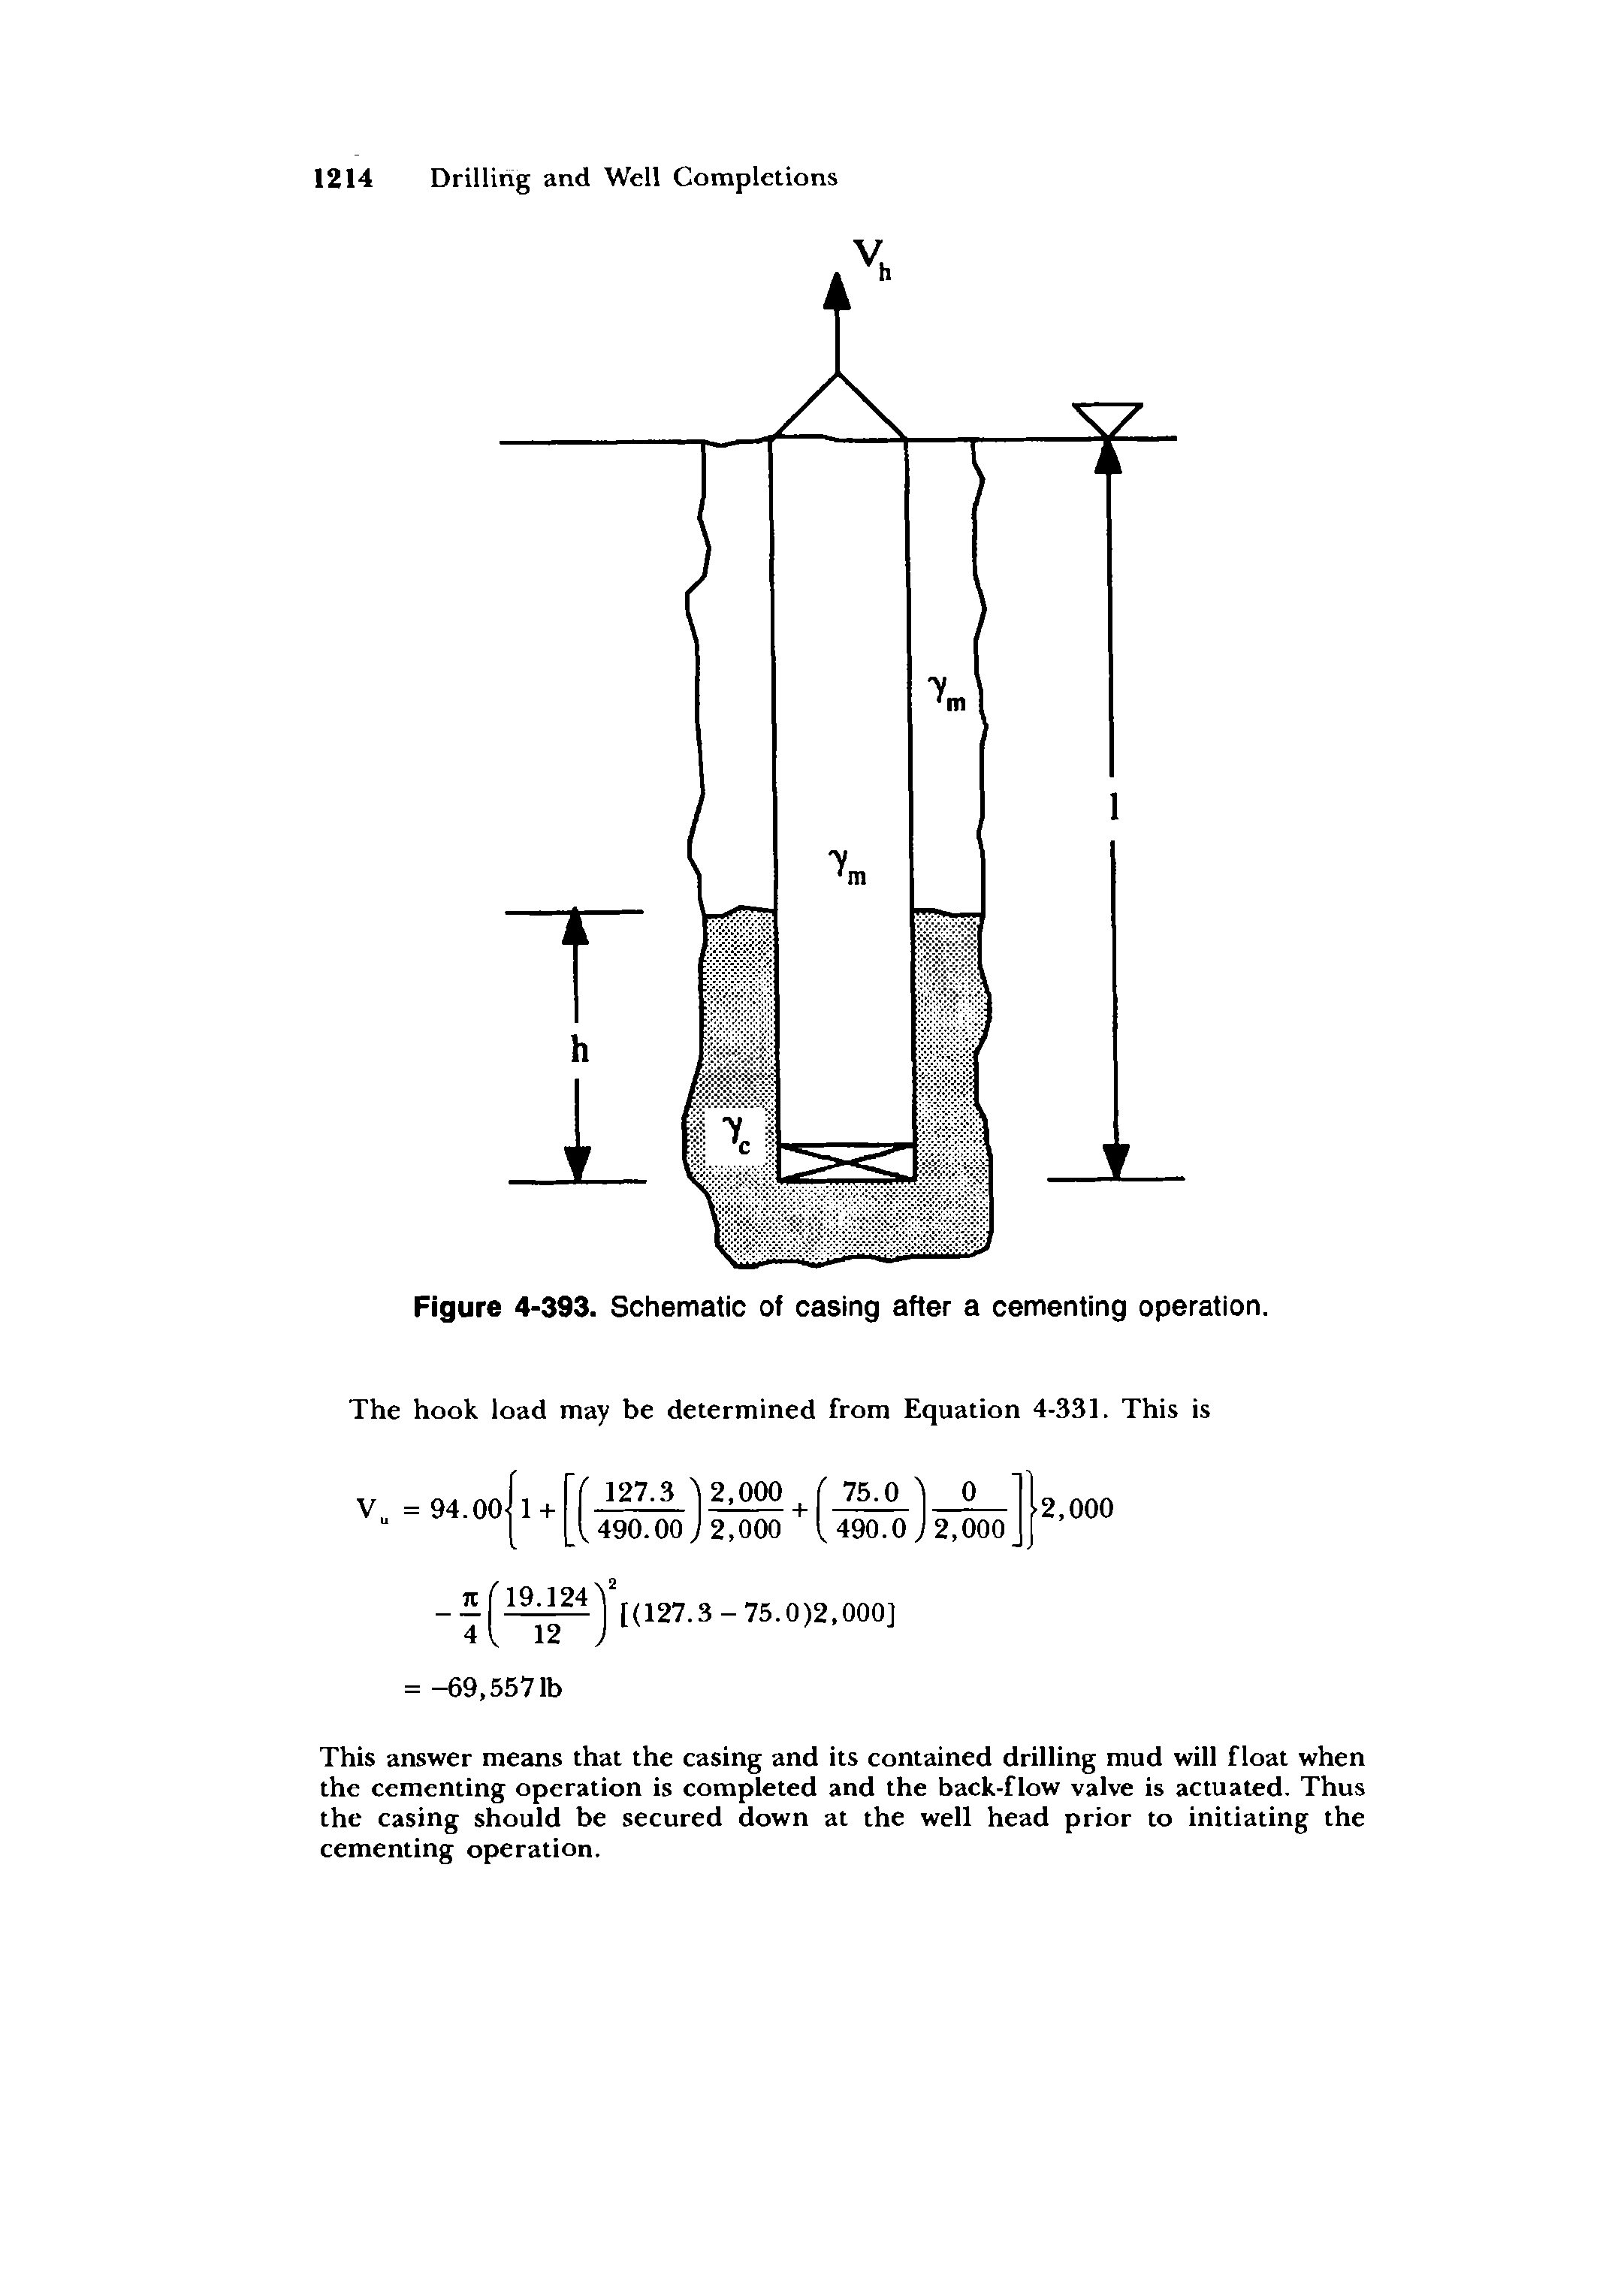 Figure 4-393. Schematic of casing after a cementing operation. The hook load may be determined from Equation 4-331. This is...